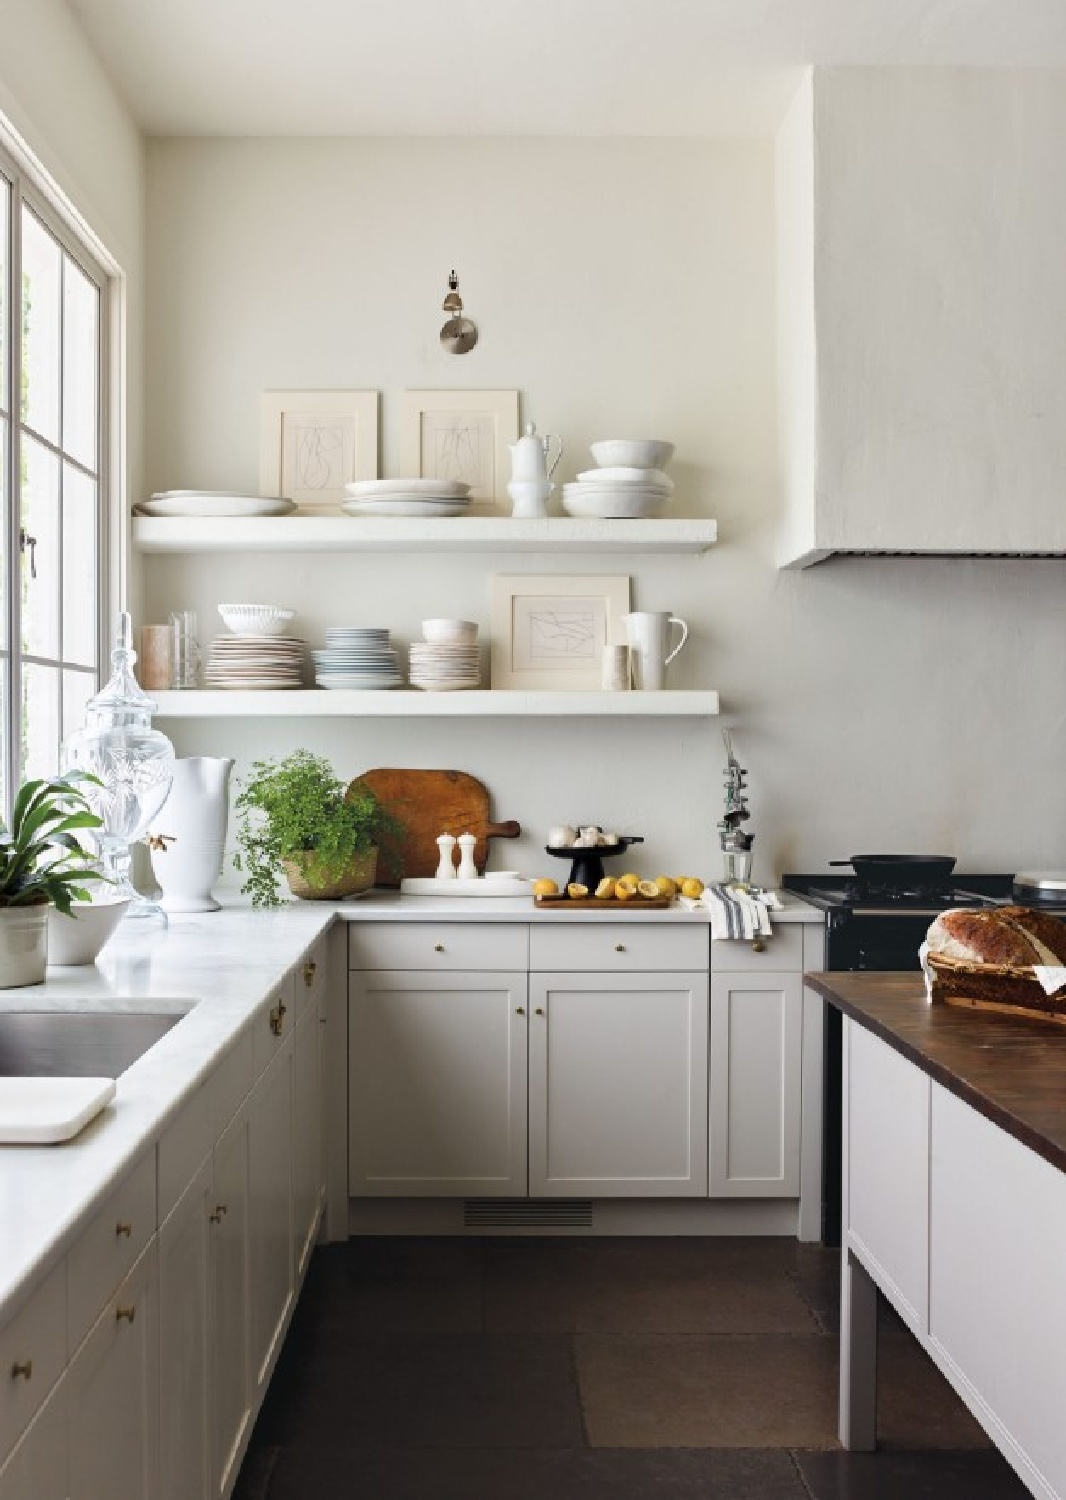 Serene white plaster in kitchen sets a quiet tone with open shelves and simple range hood. Architecture by D. Stanley Dixon with interiors by Carolyn Malone. #europeancountry #carolynmalone #stanleydixon #serenekitchens